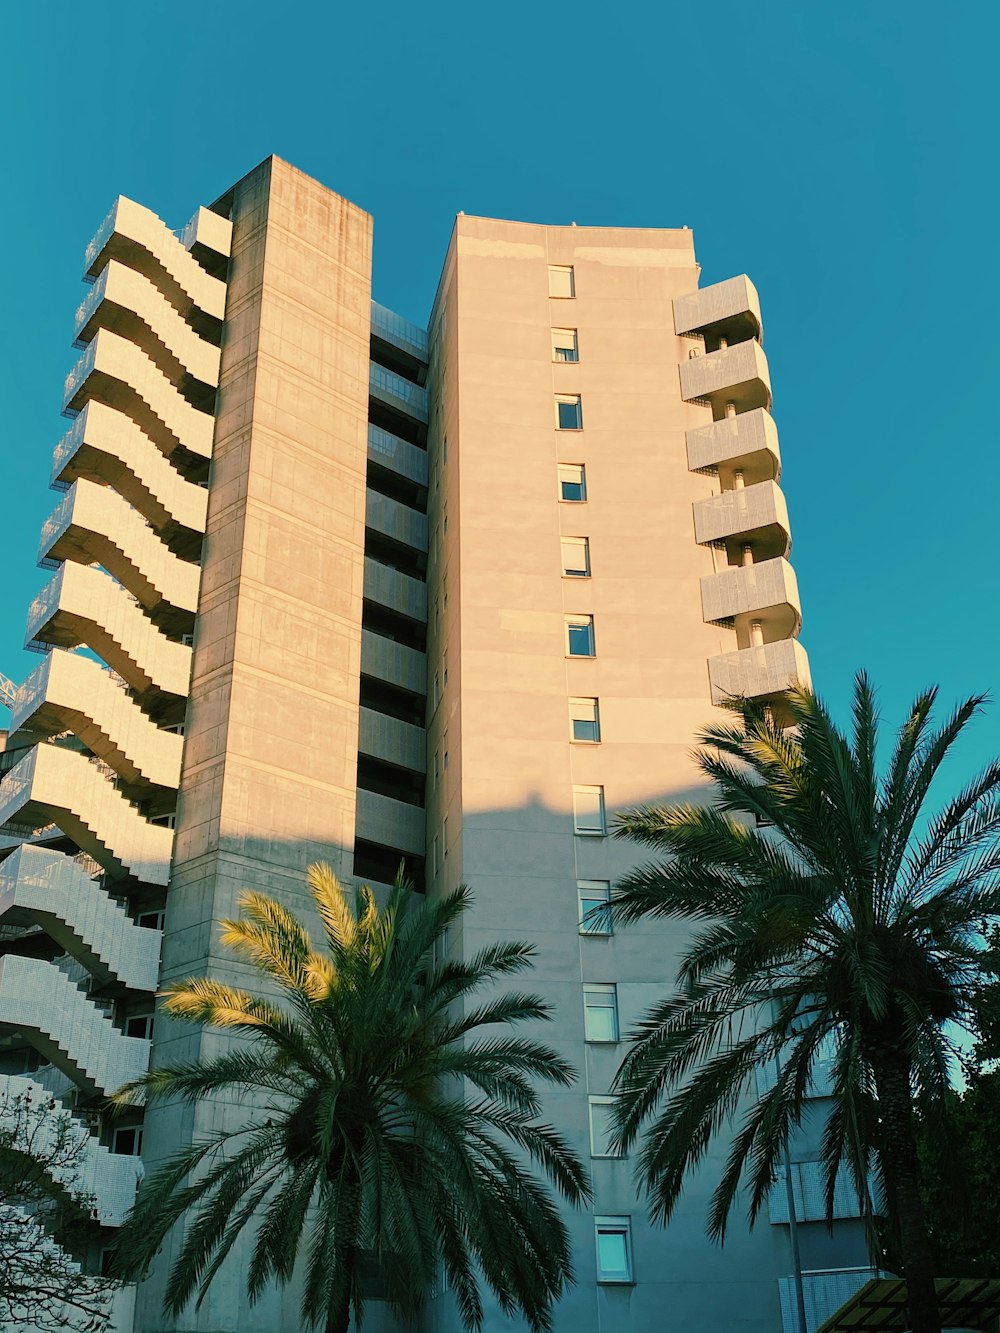 beige concrete building near palm trees during daytime